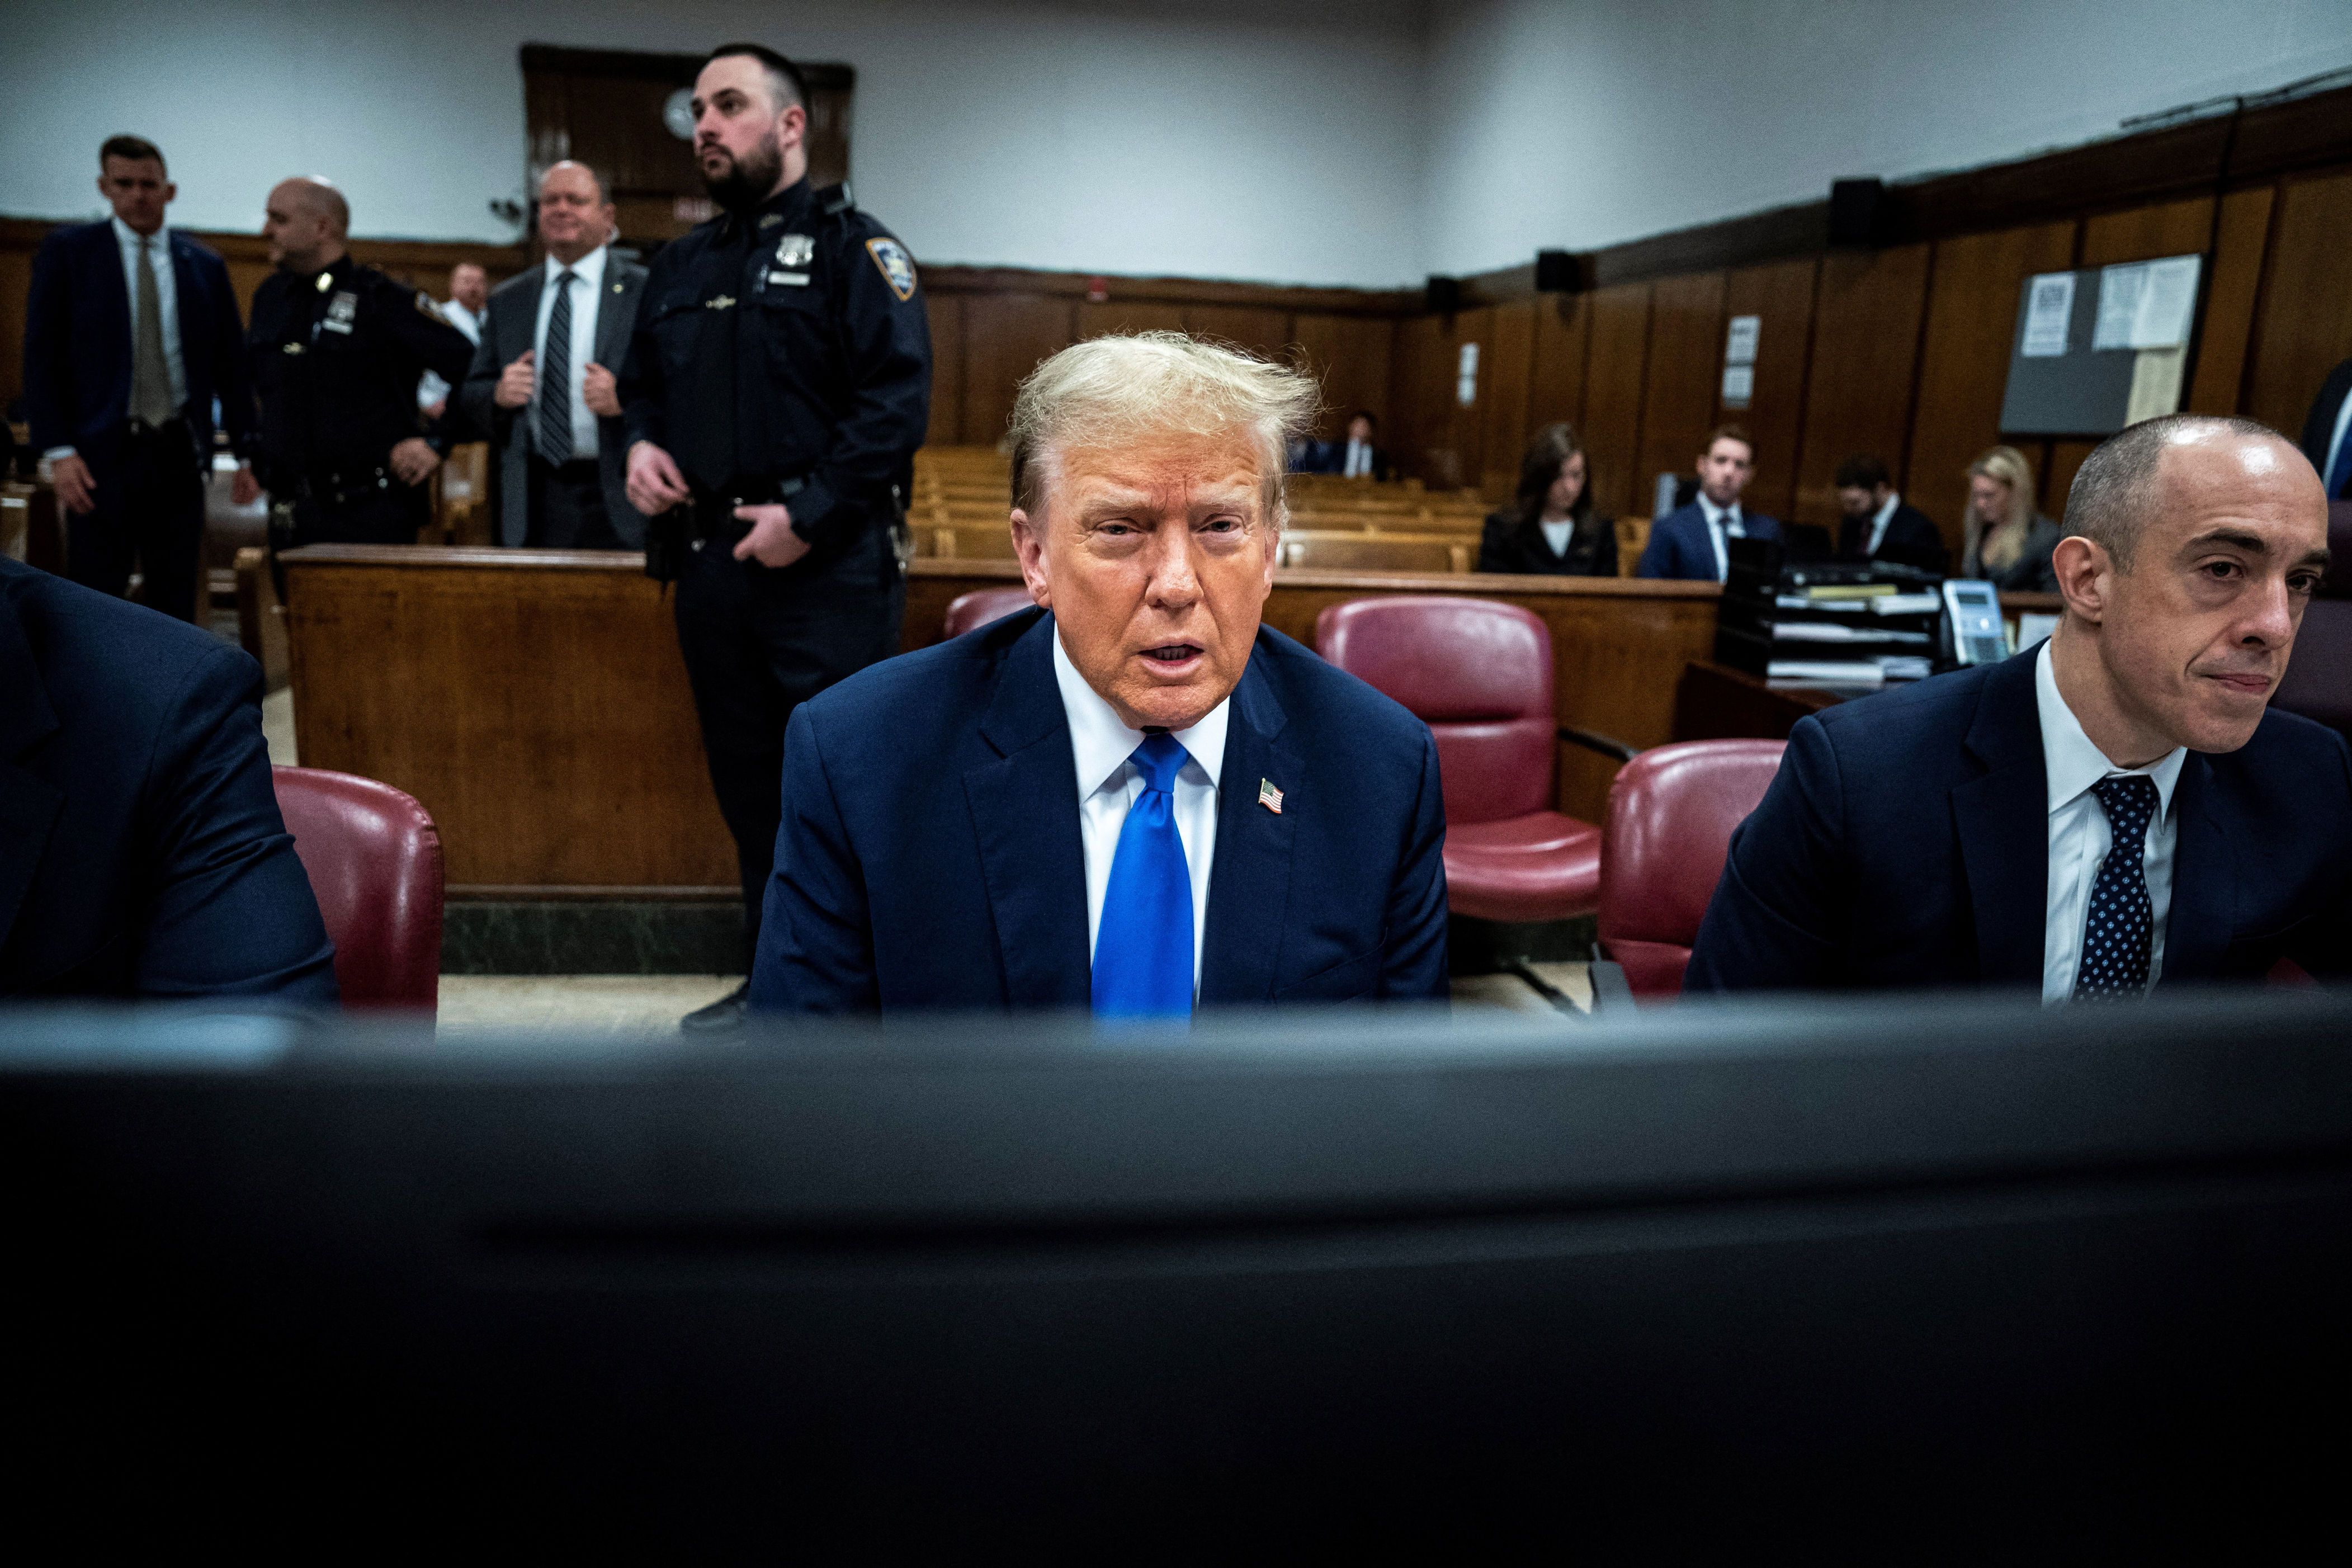 sleeping, smirking and stalking out of court: donald trump’s first week of criminal trial in pictures